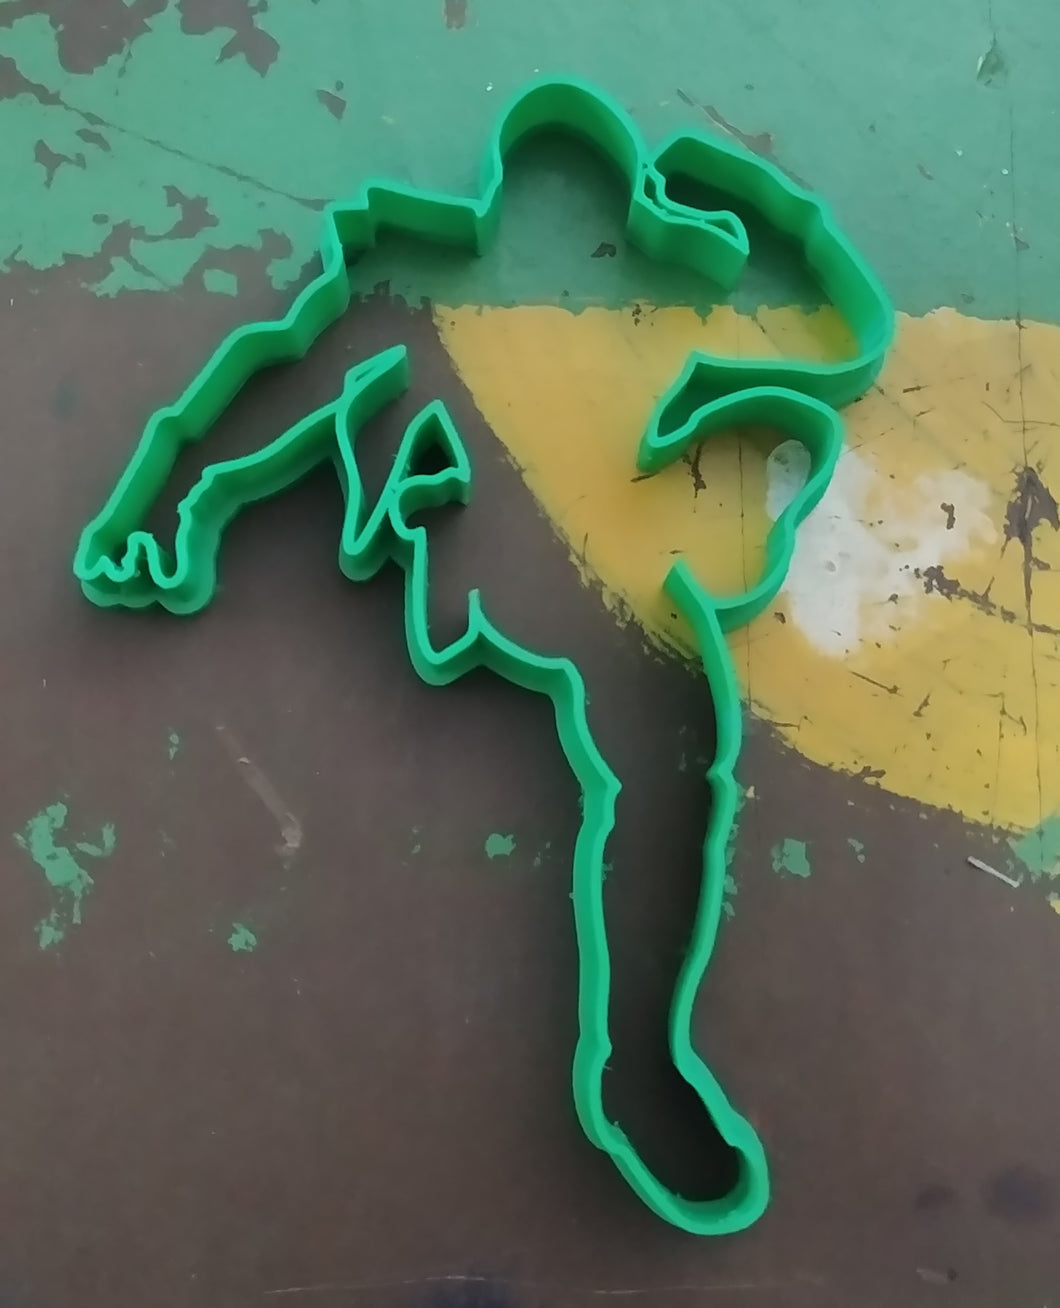 3D Printed Cookie Cutter Inspired by Super Smash Bros. Captain Falcon